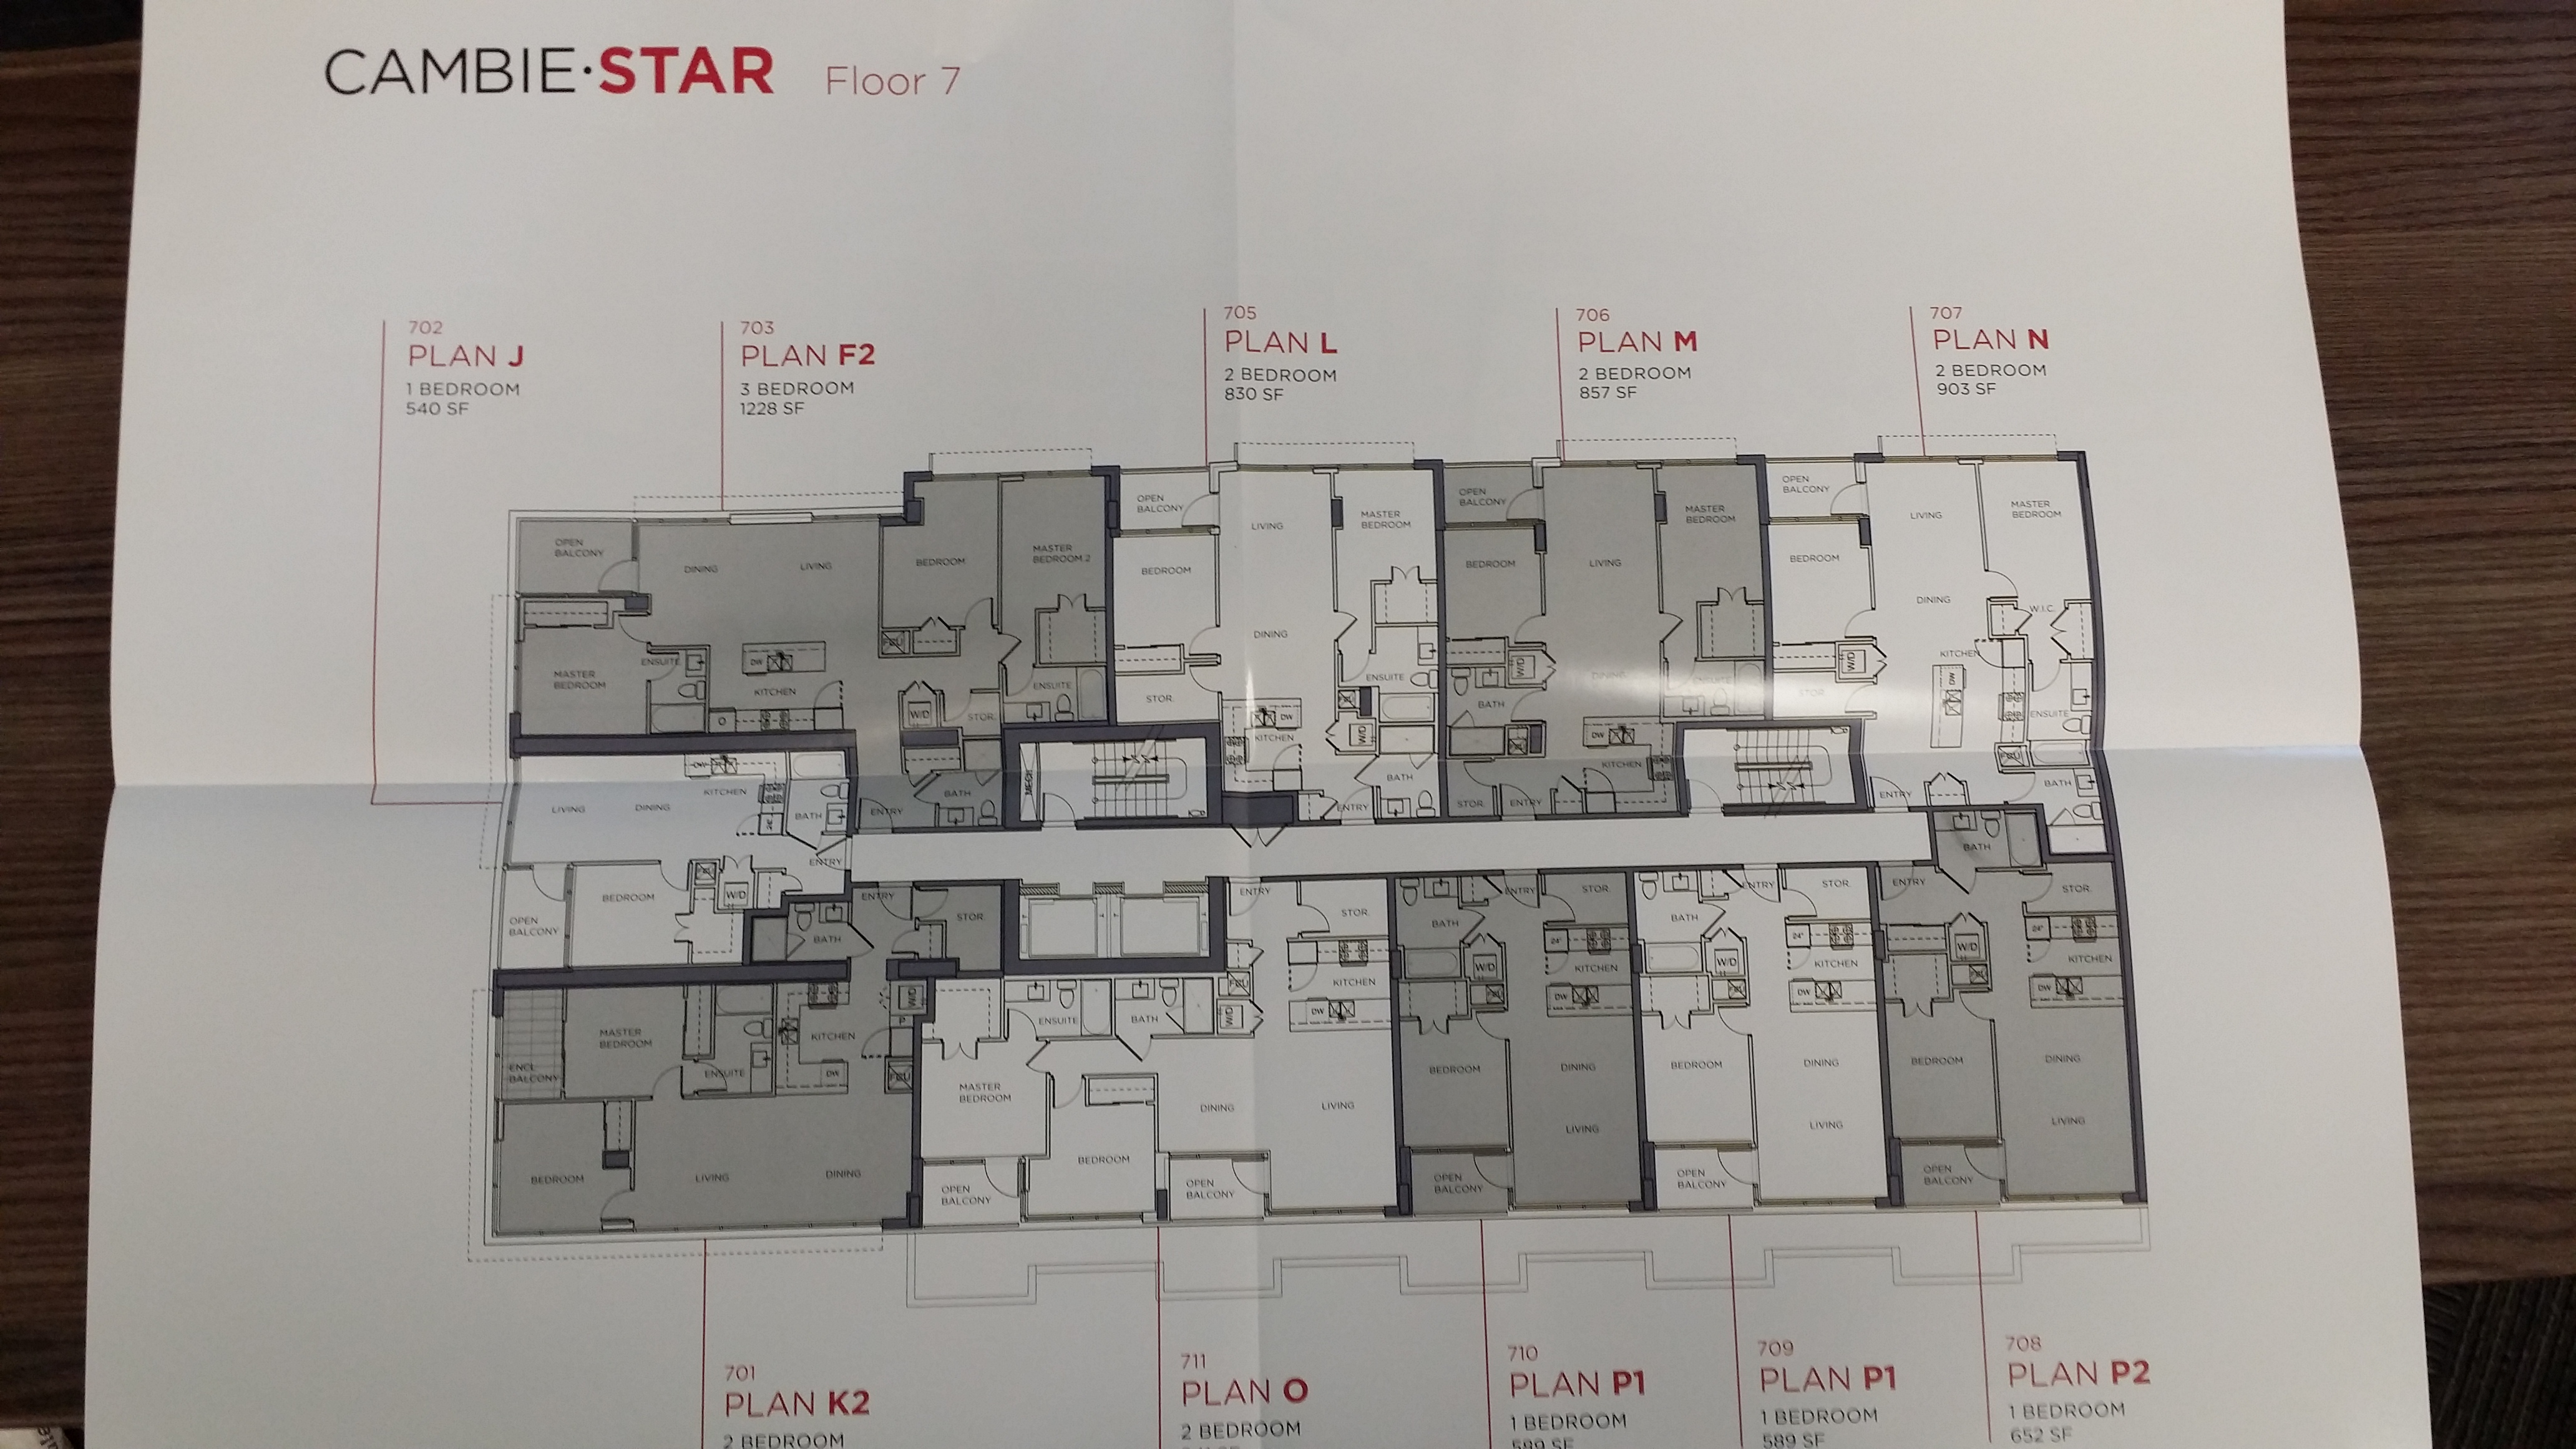 Cambie Star 7th Floor Plans